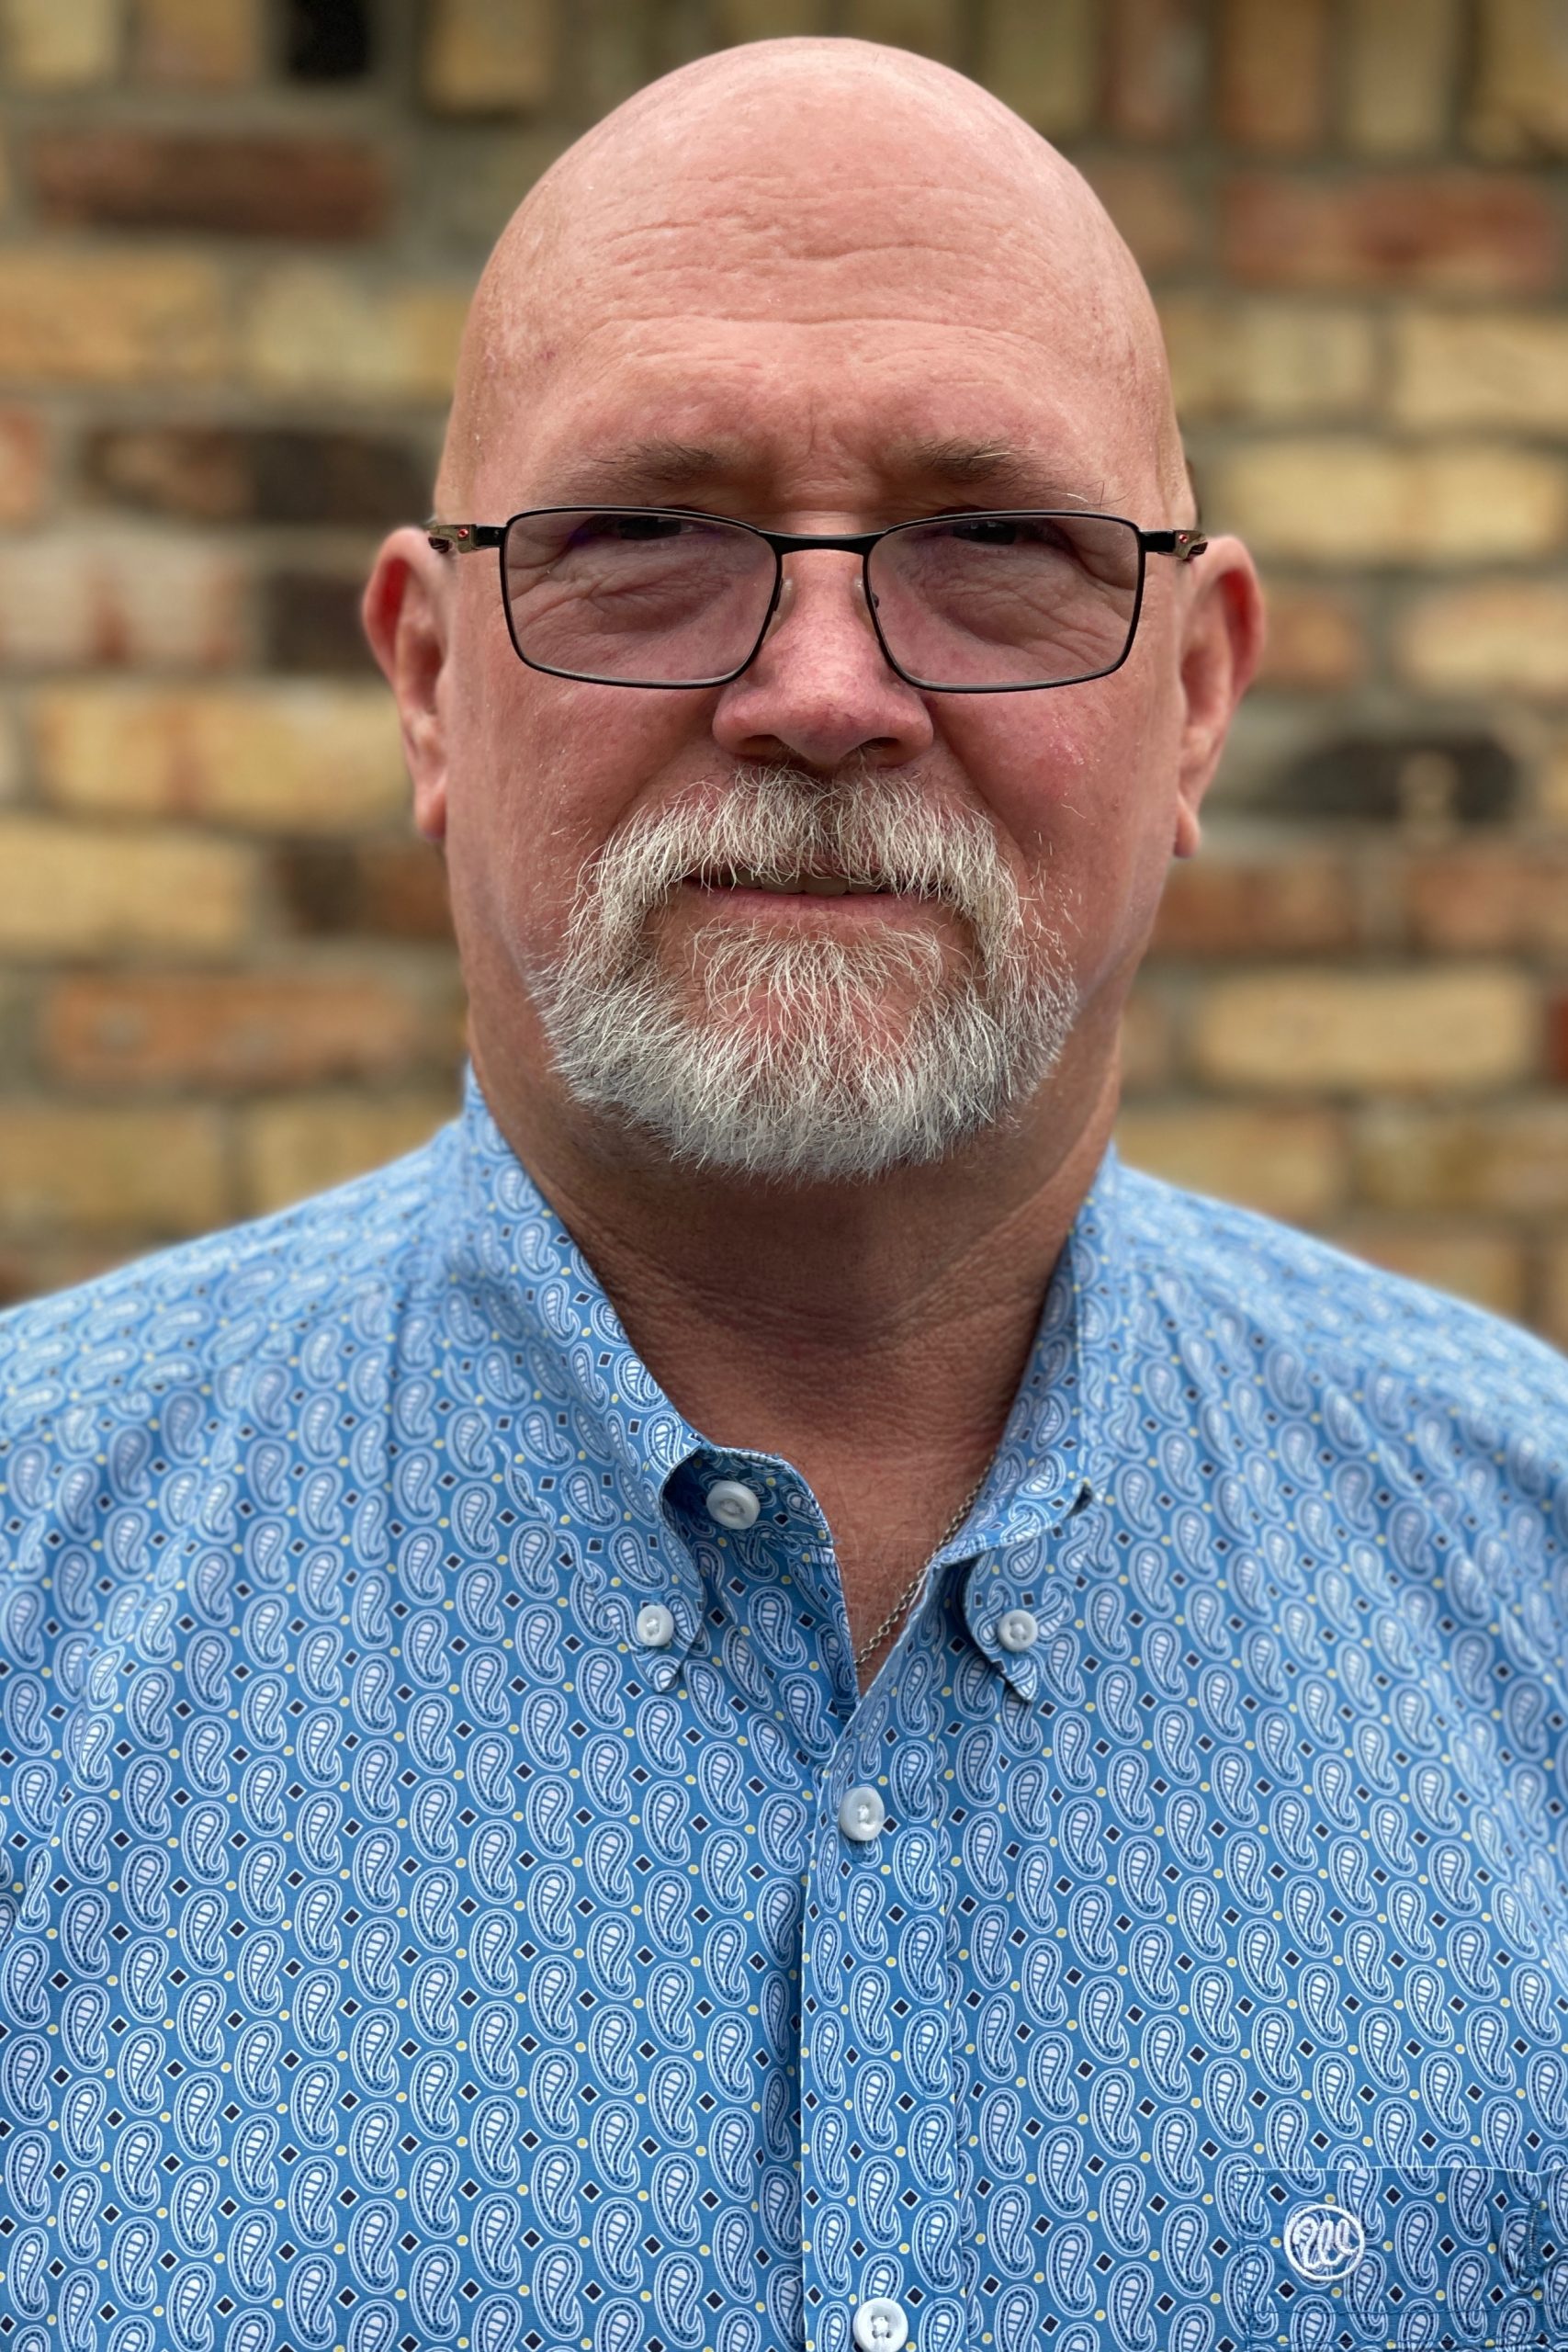 James has over 30 years in electrical construction. Starting out as a Lineman for AEP/West Texas Utilities. He is responsible for scheduling, safety initiatives, recruiting, and technical training.